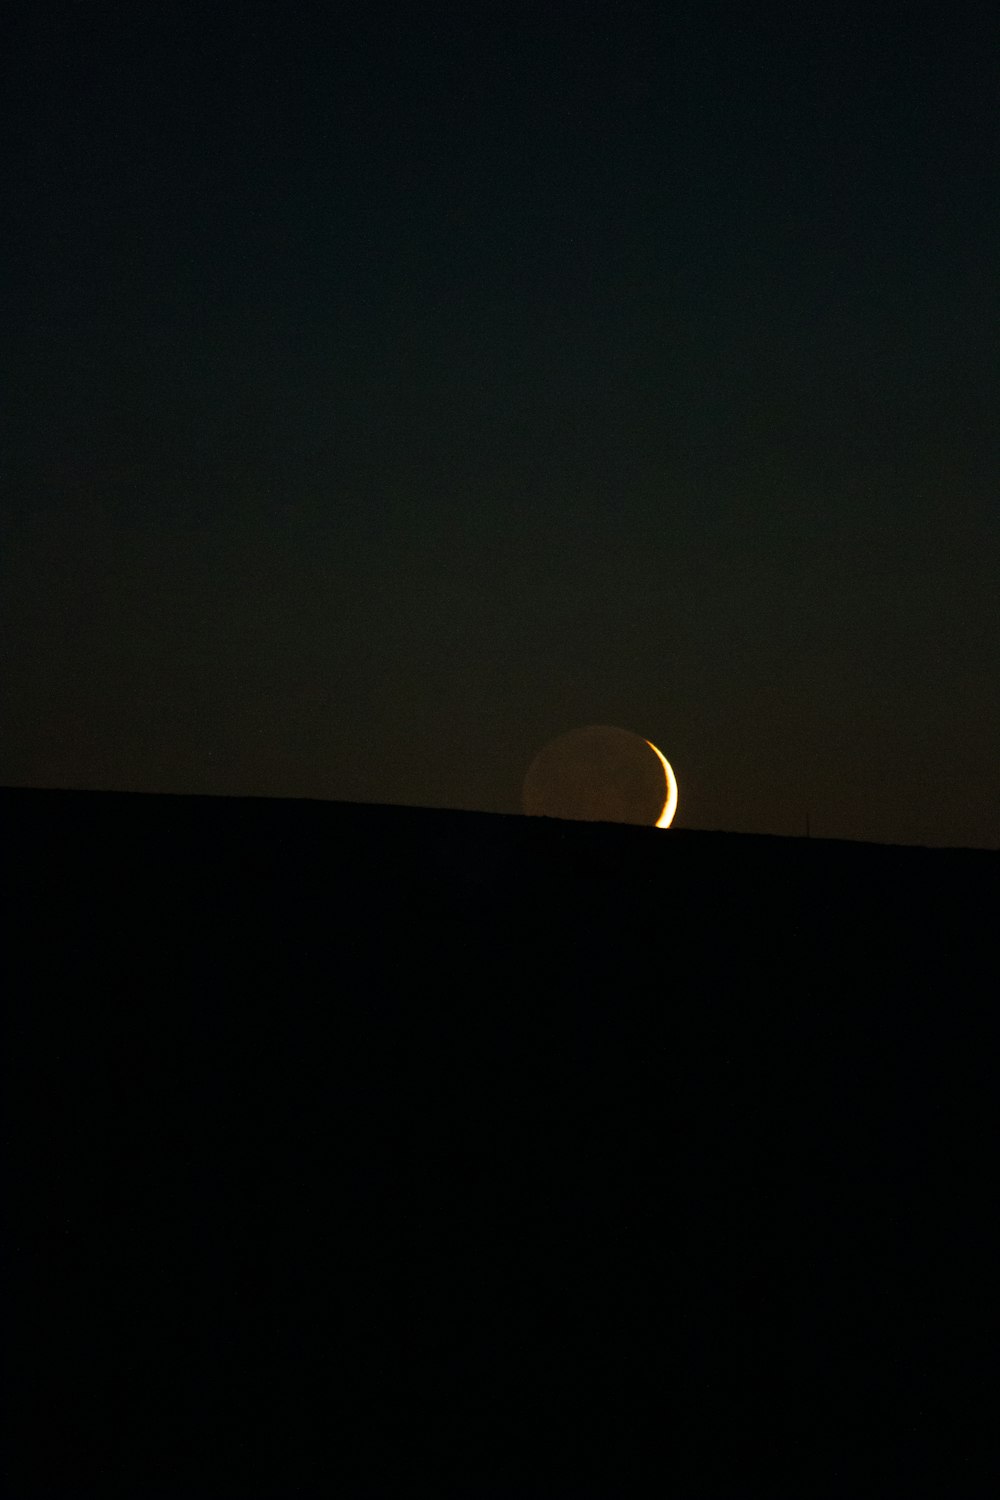 the moon is setting over the horizon of the horizon